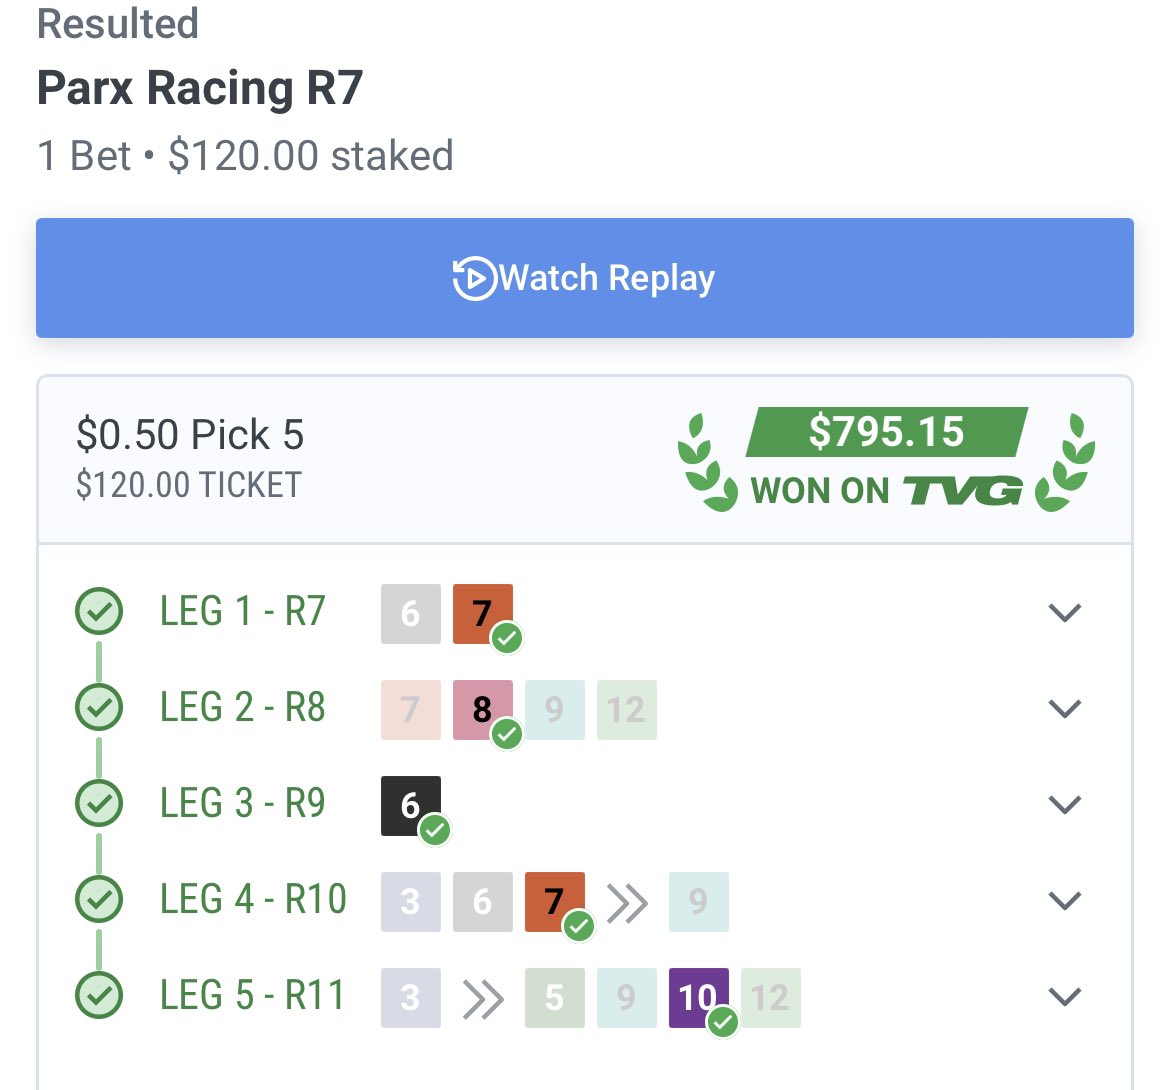 Not a bad little late day score. Would’ve been sweet to have the 12 (45/1) close it out in final leg